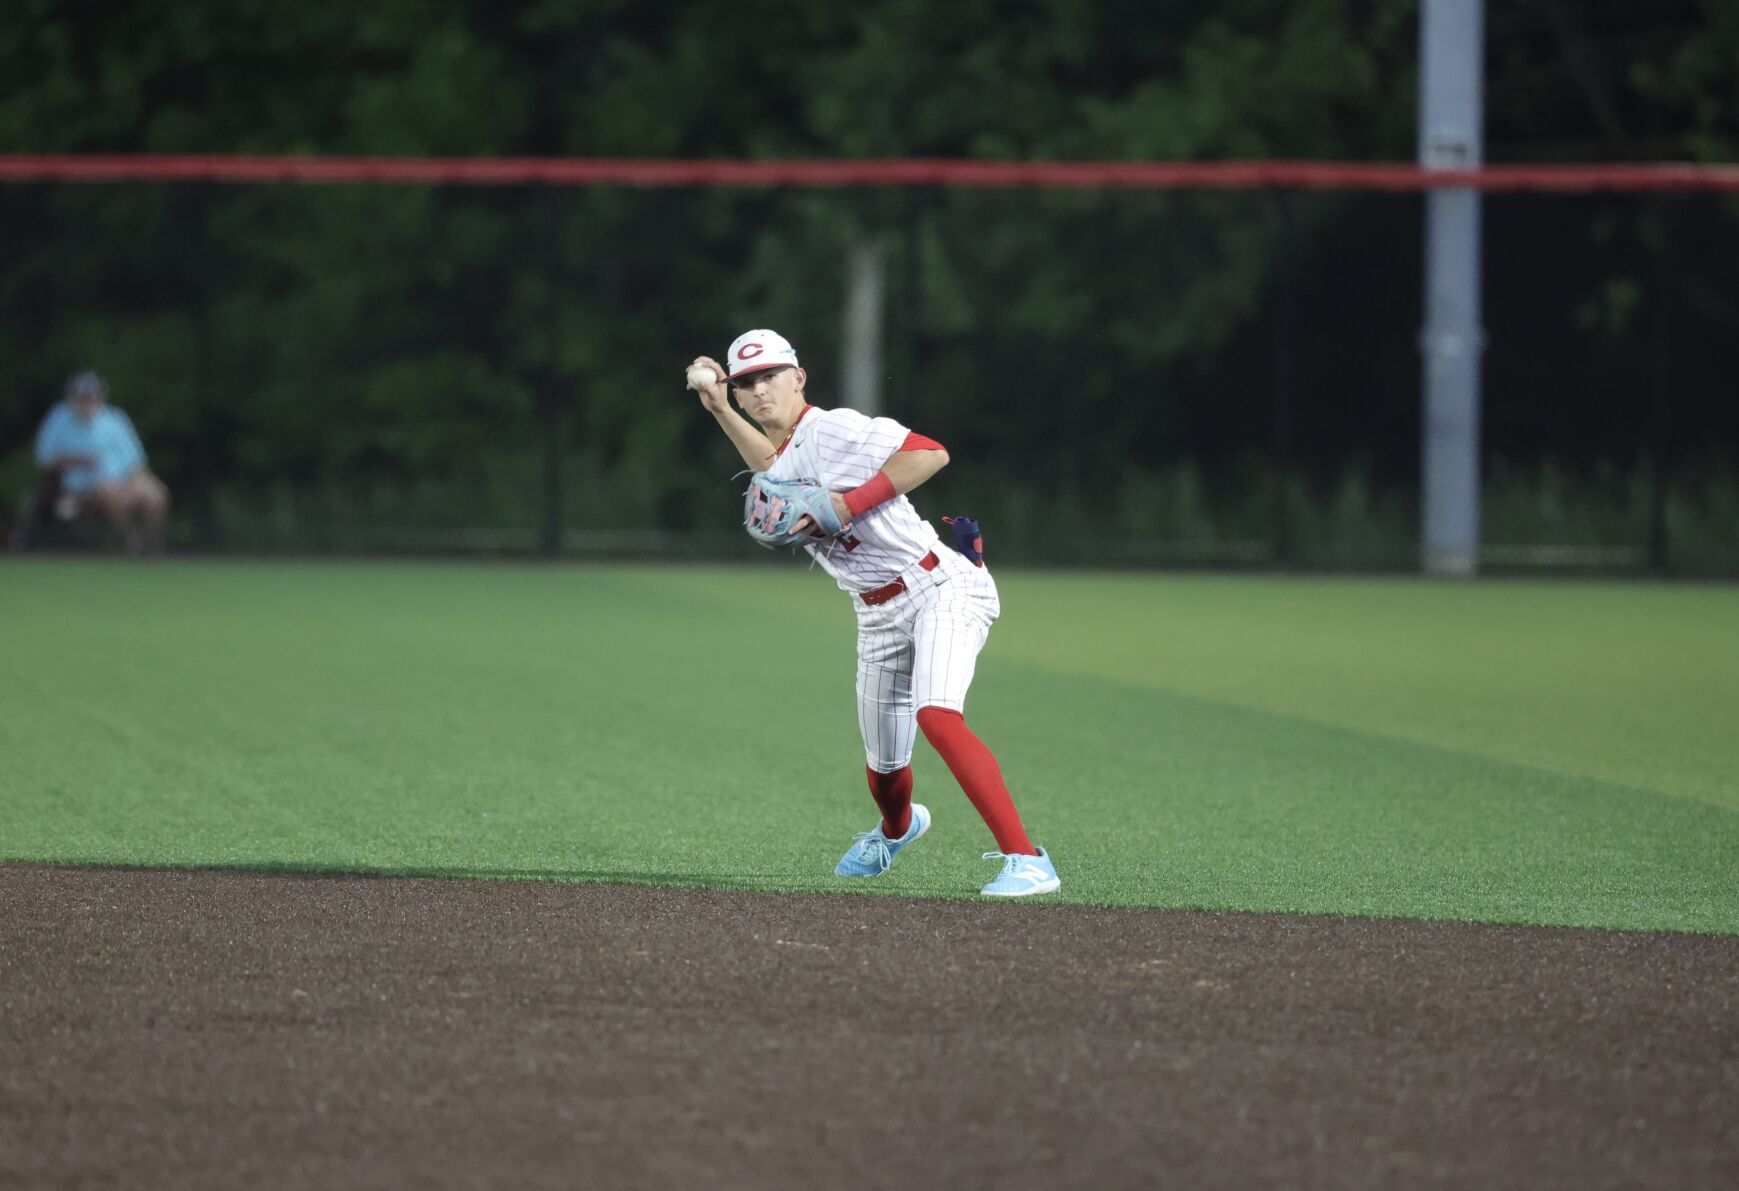 Redhounds fall in extra innings to Tates Creek